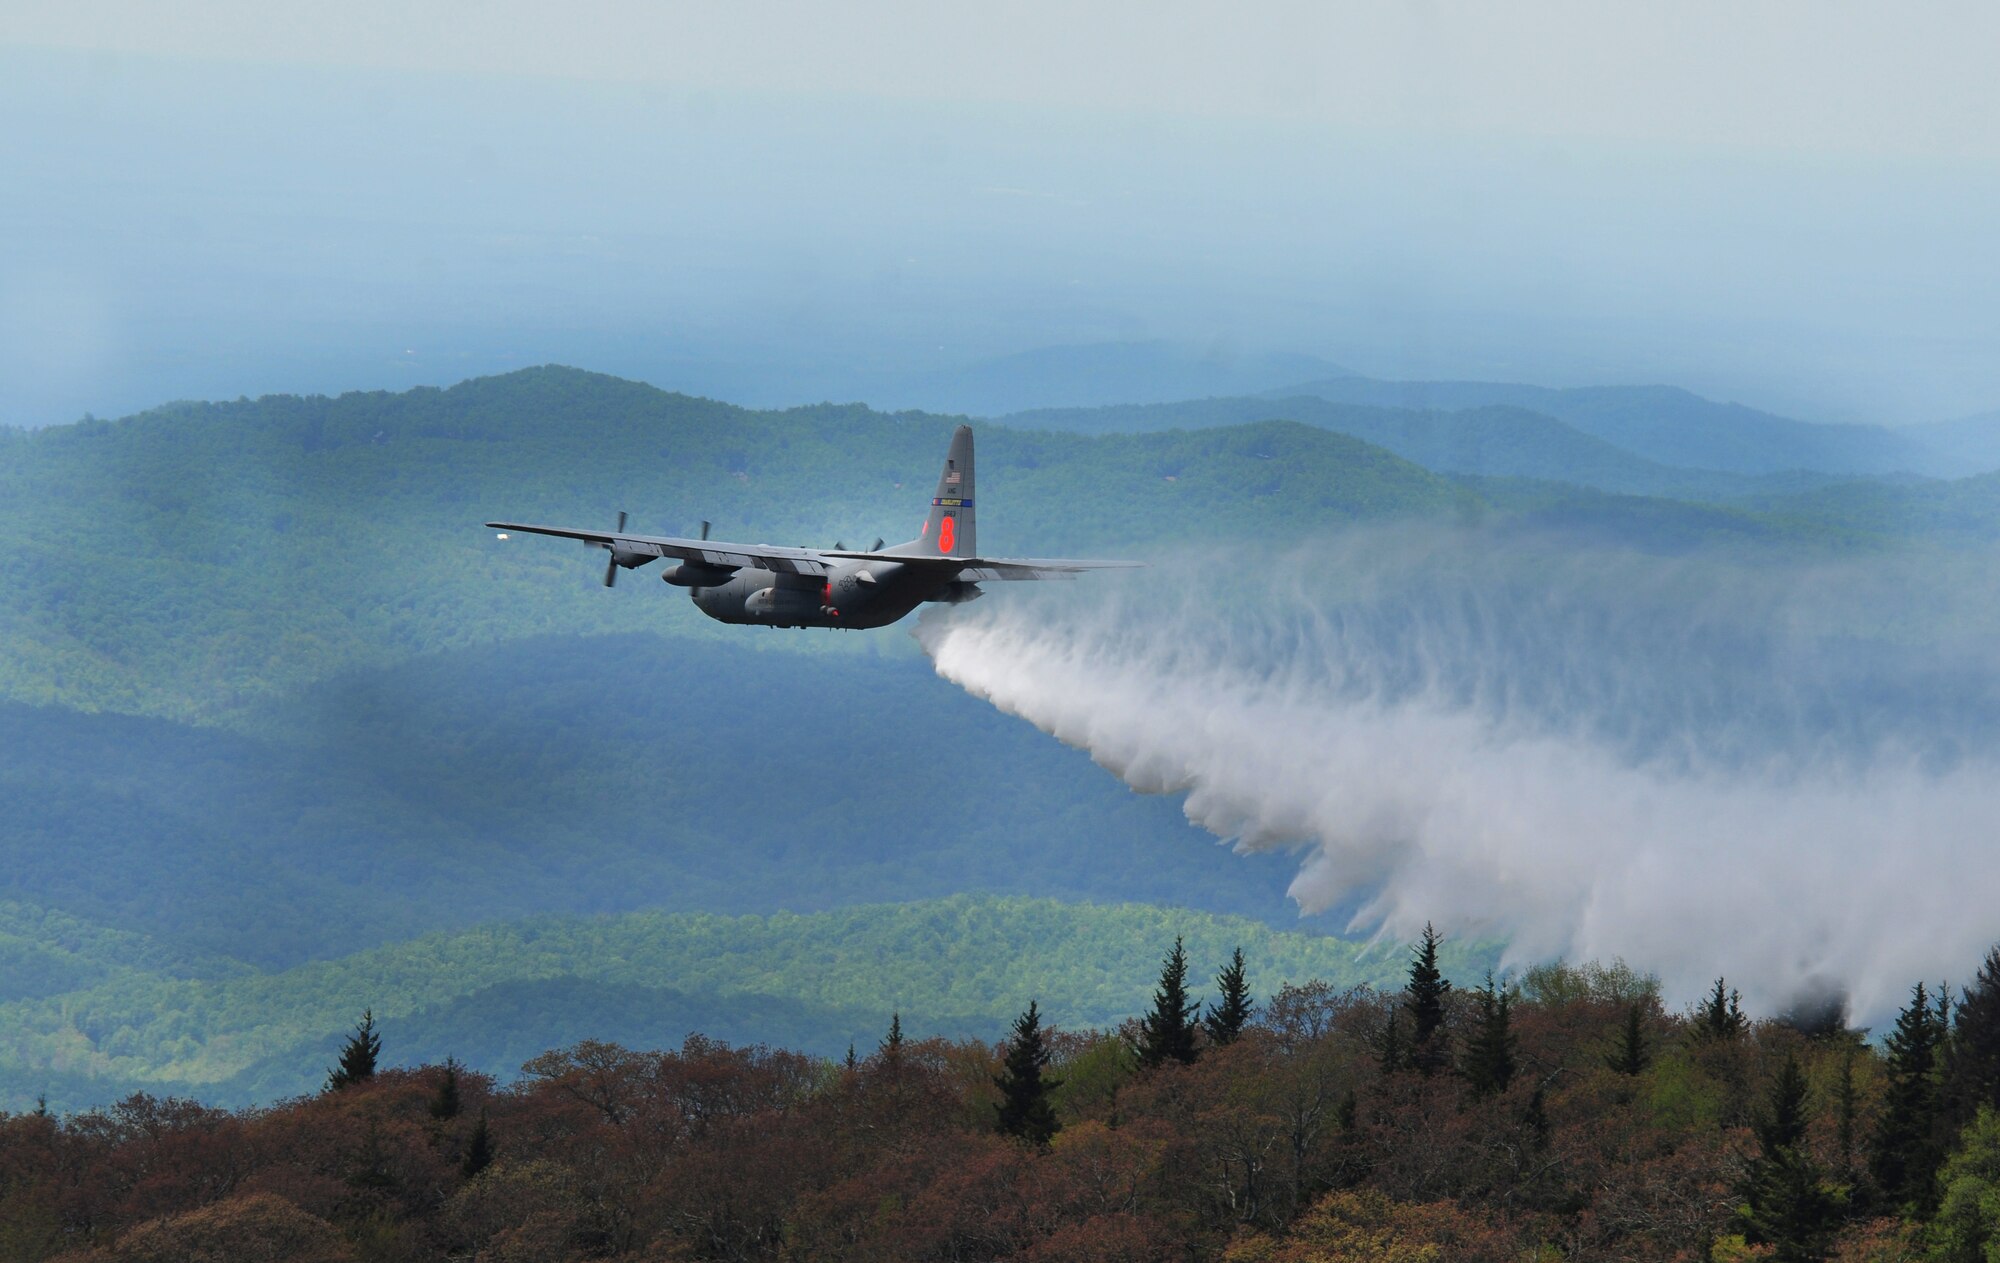 A North Carolina Air National Guard C-130 Hercules aircraft and her six man crew drop water (simulating fire retardant) during firefighting training operations over a remote portion of the Pisgah Ranger District, Pisgah National Forest.  The aircraft is carrying the self-contained Modular Airborne Fire Fighting System owned by the Forest Service.  As an interagency Defense Department and Forest Service program, MAFFS provides aerial firefighting resources when commercial and private air tankers are no longer able to meet the needs of the Forest Service. (Air National Guard photo by Master Sgt. Patricia F. Moran, 145th Airlift Wing Public Affairs/Released)